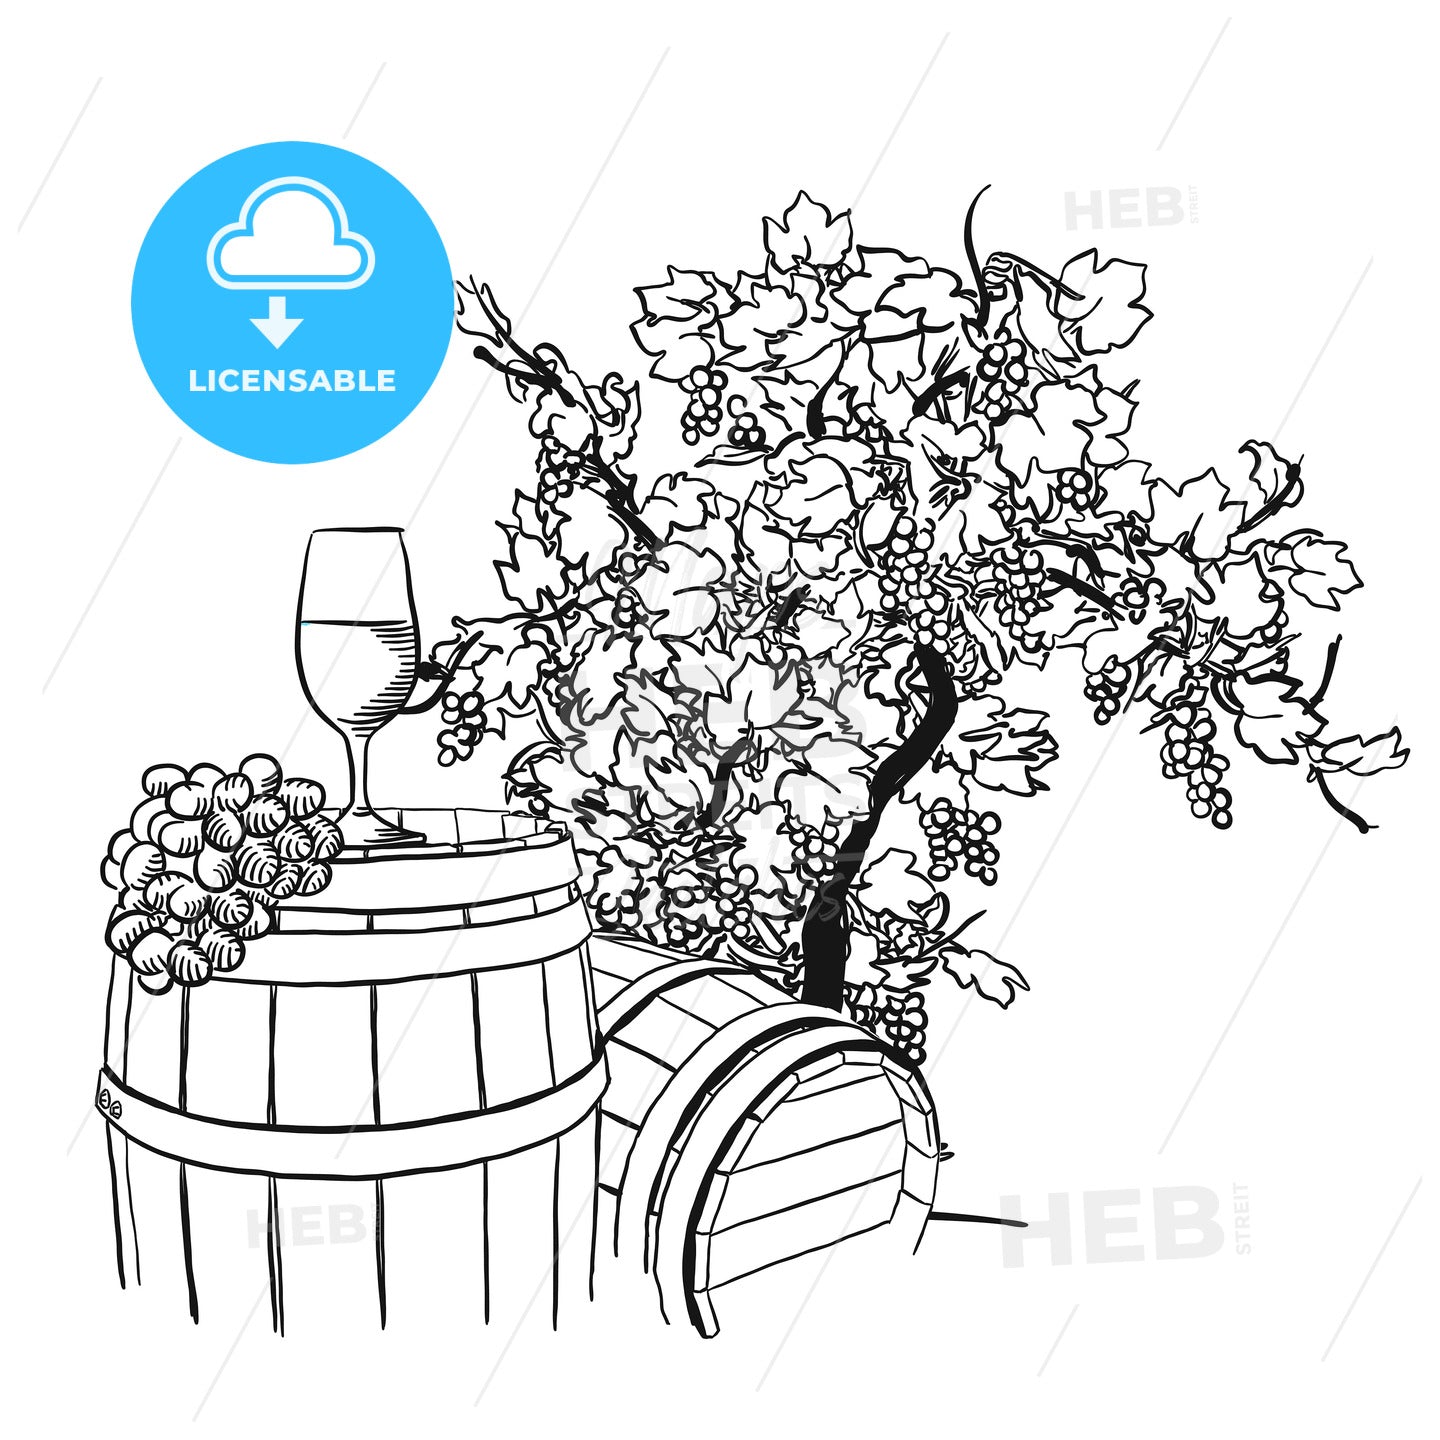 Vine barrel, glass and tree drawing – instant download